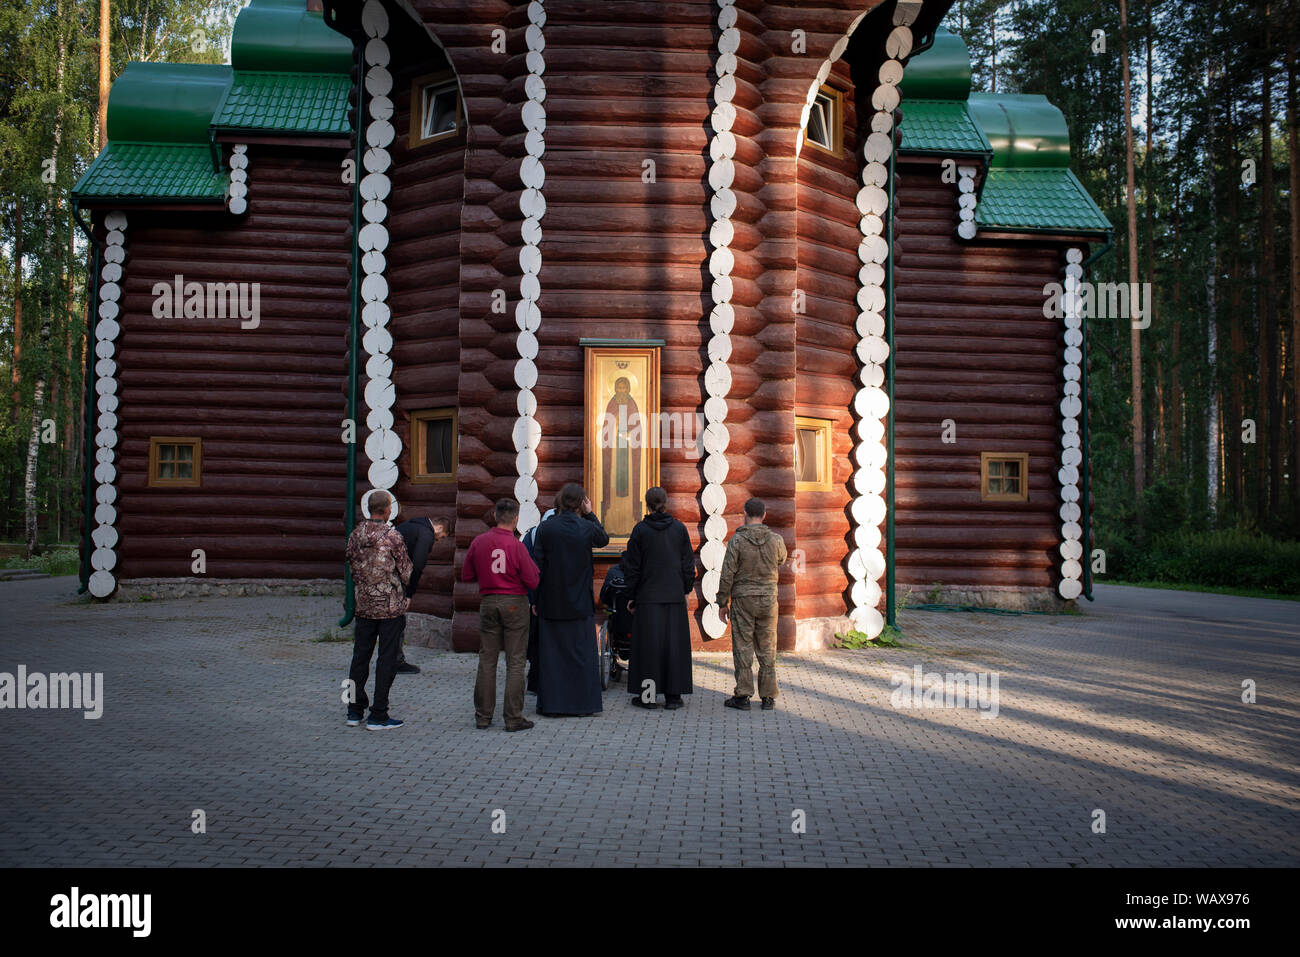 Small isolated groups come to pray in front of the representation of the icon of Rostov of Saint Sergei de Radonezh. Stock Photo